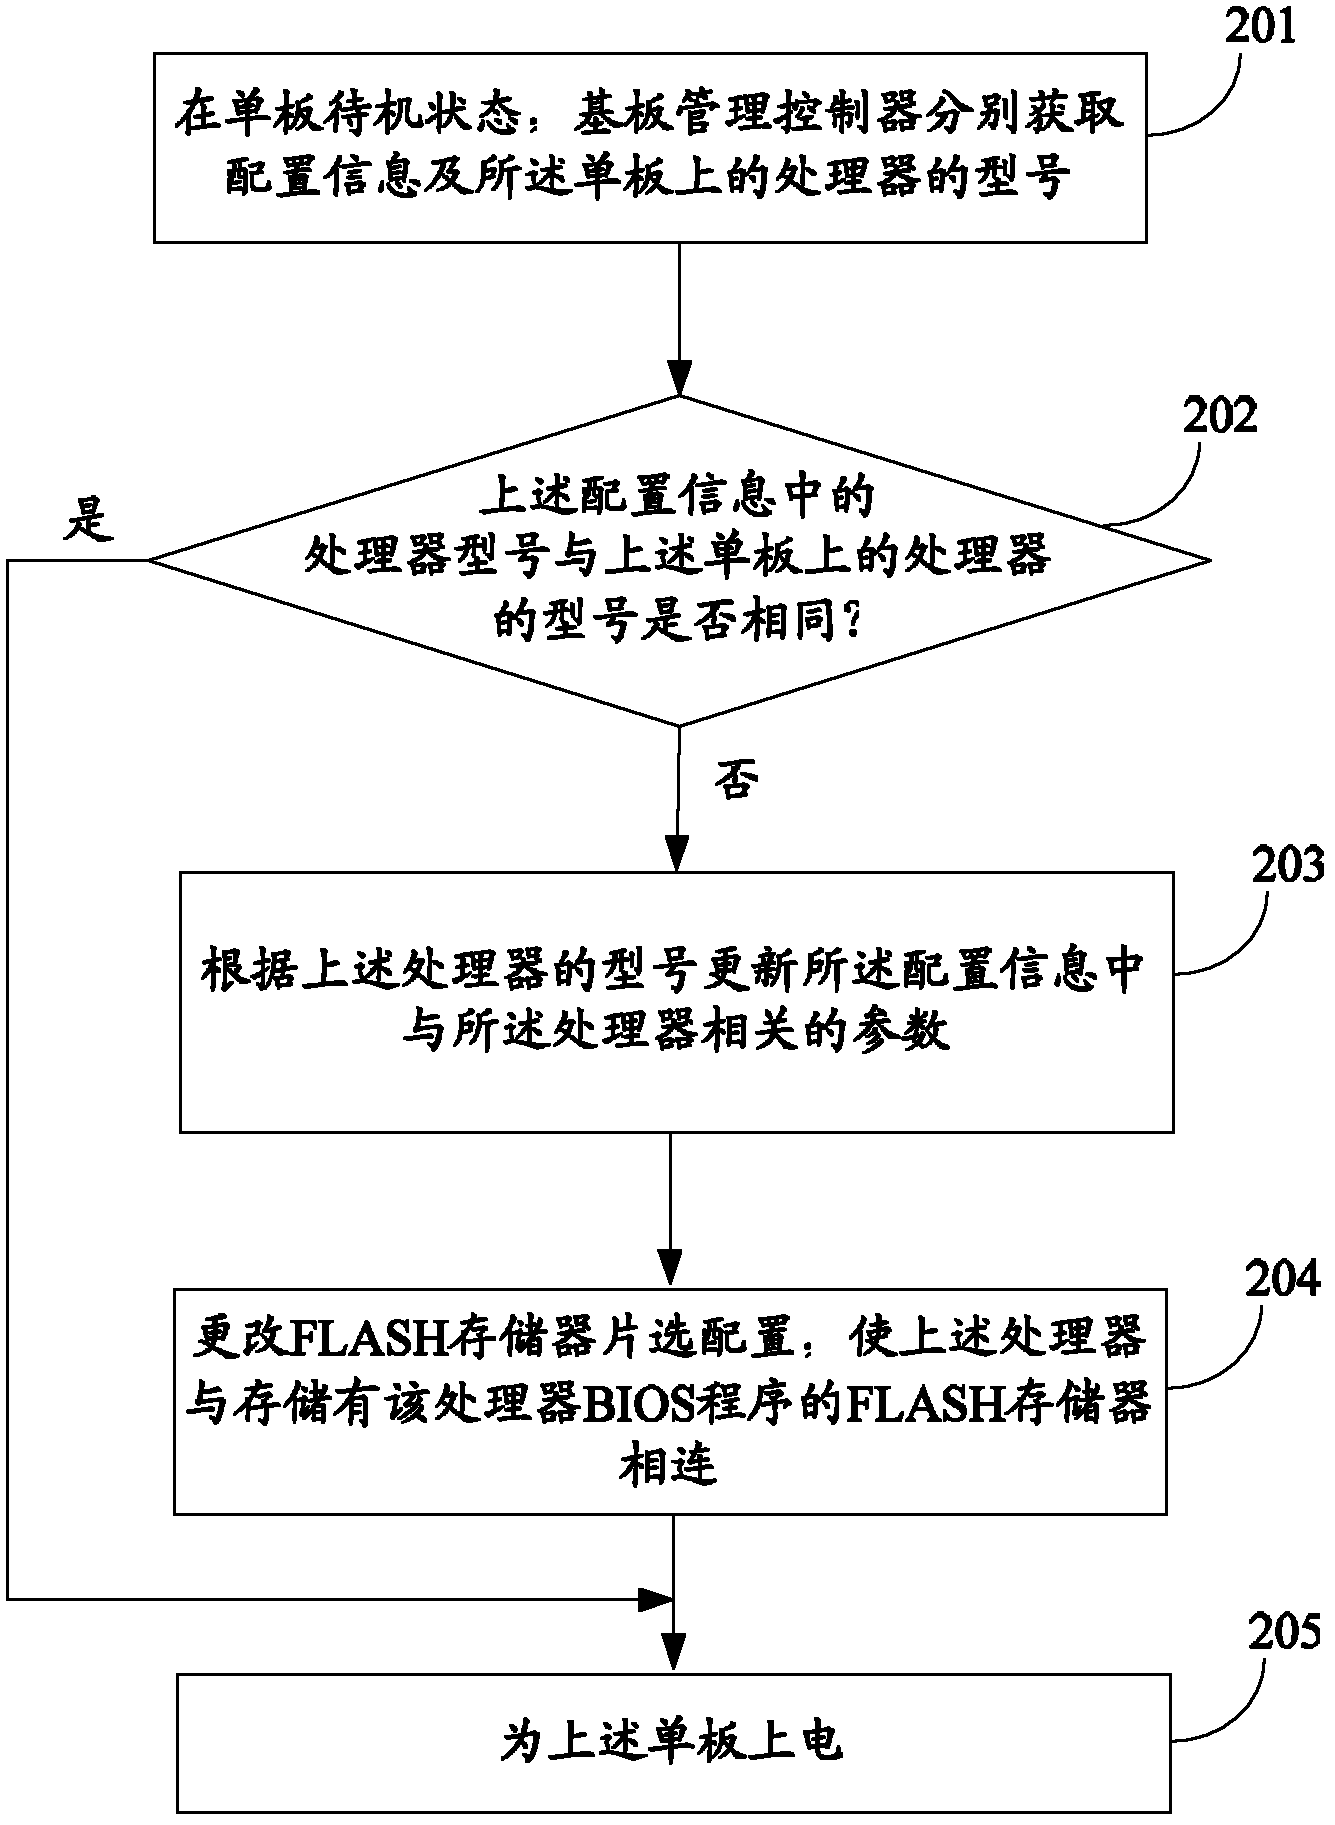 Method and device for realizing compatibility of different processors